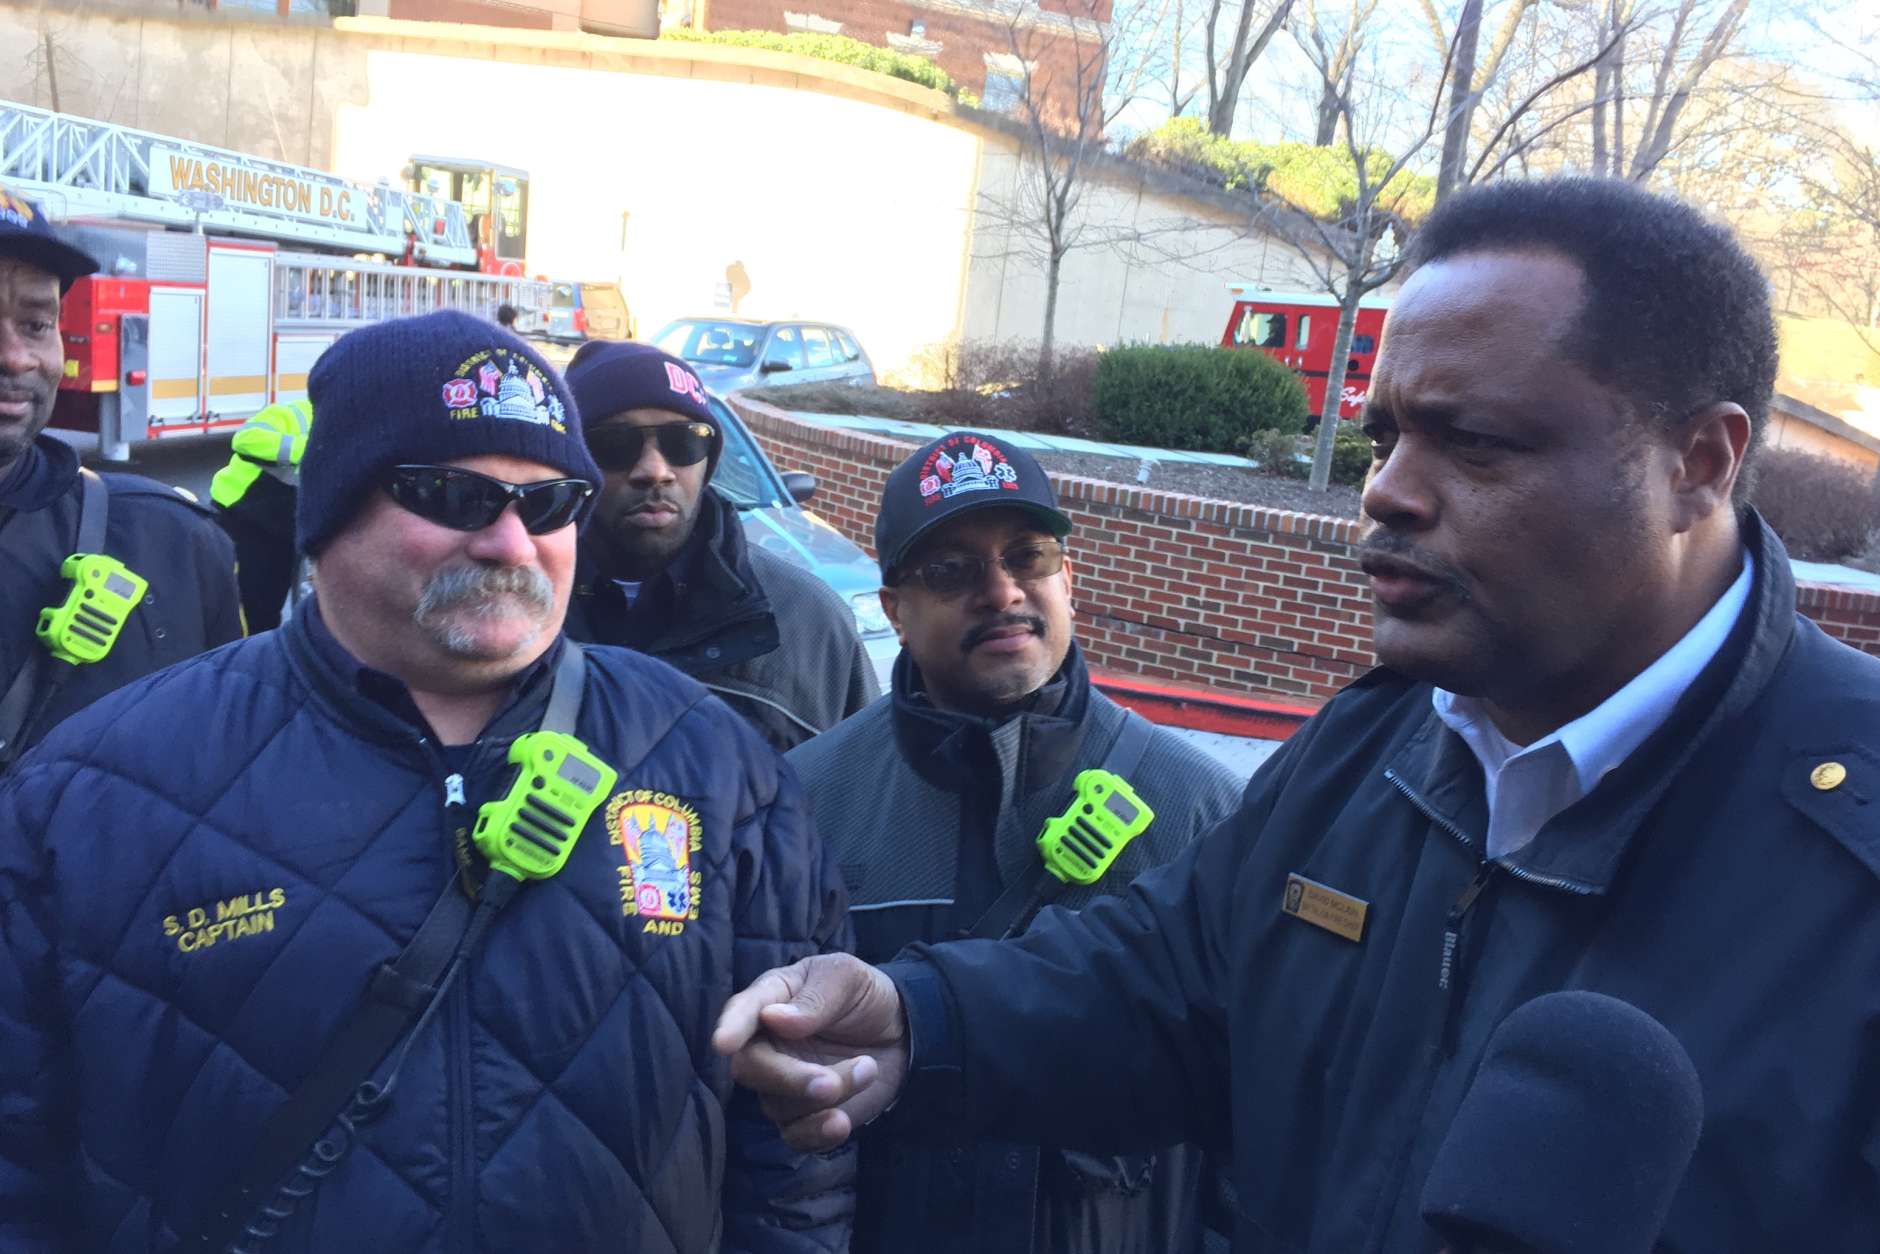 Battalion Chief David Mclain tells firefighters about another child to visit who is too ill to come outside. (WTOP/Krist King)